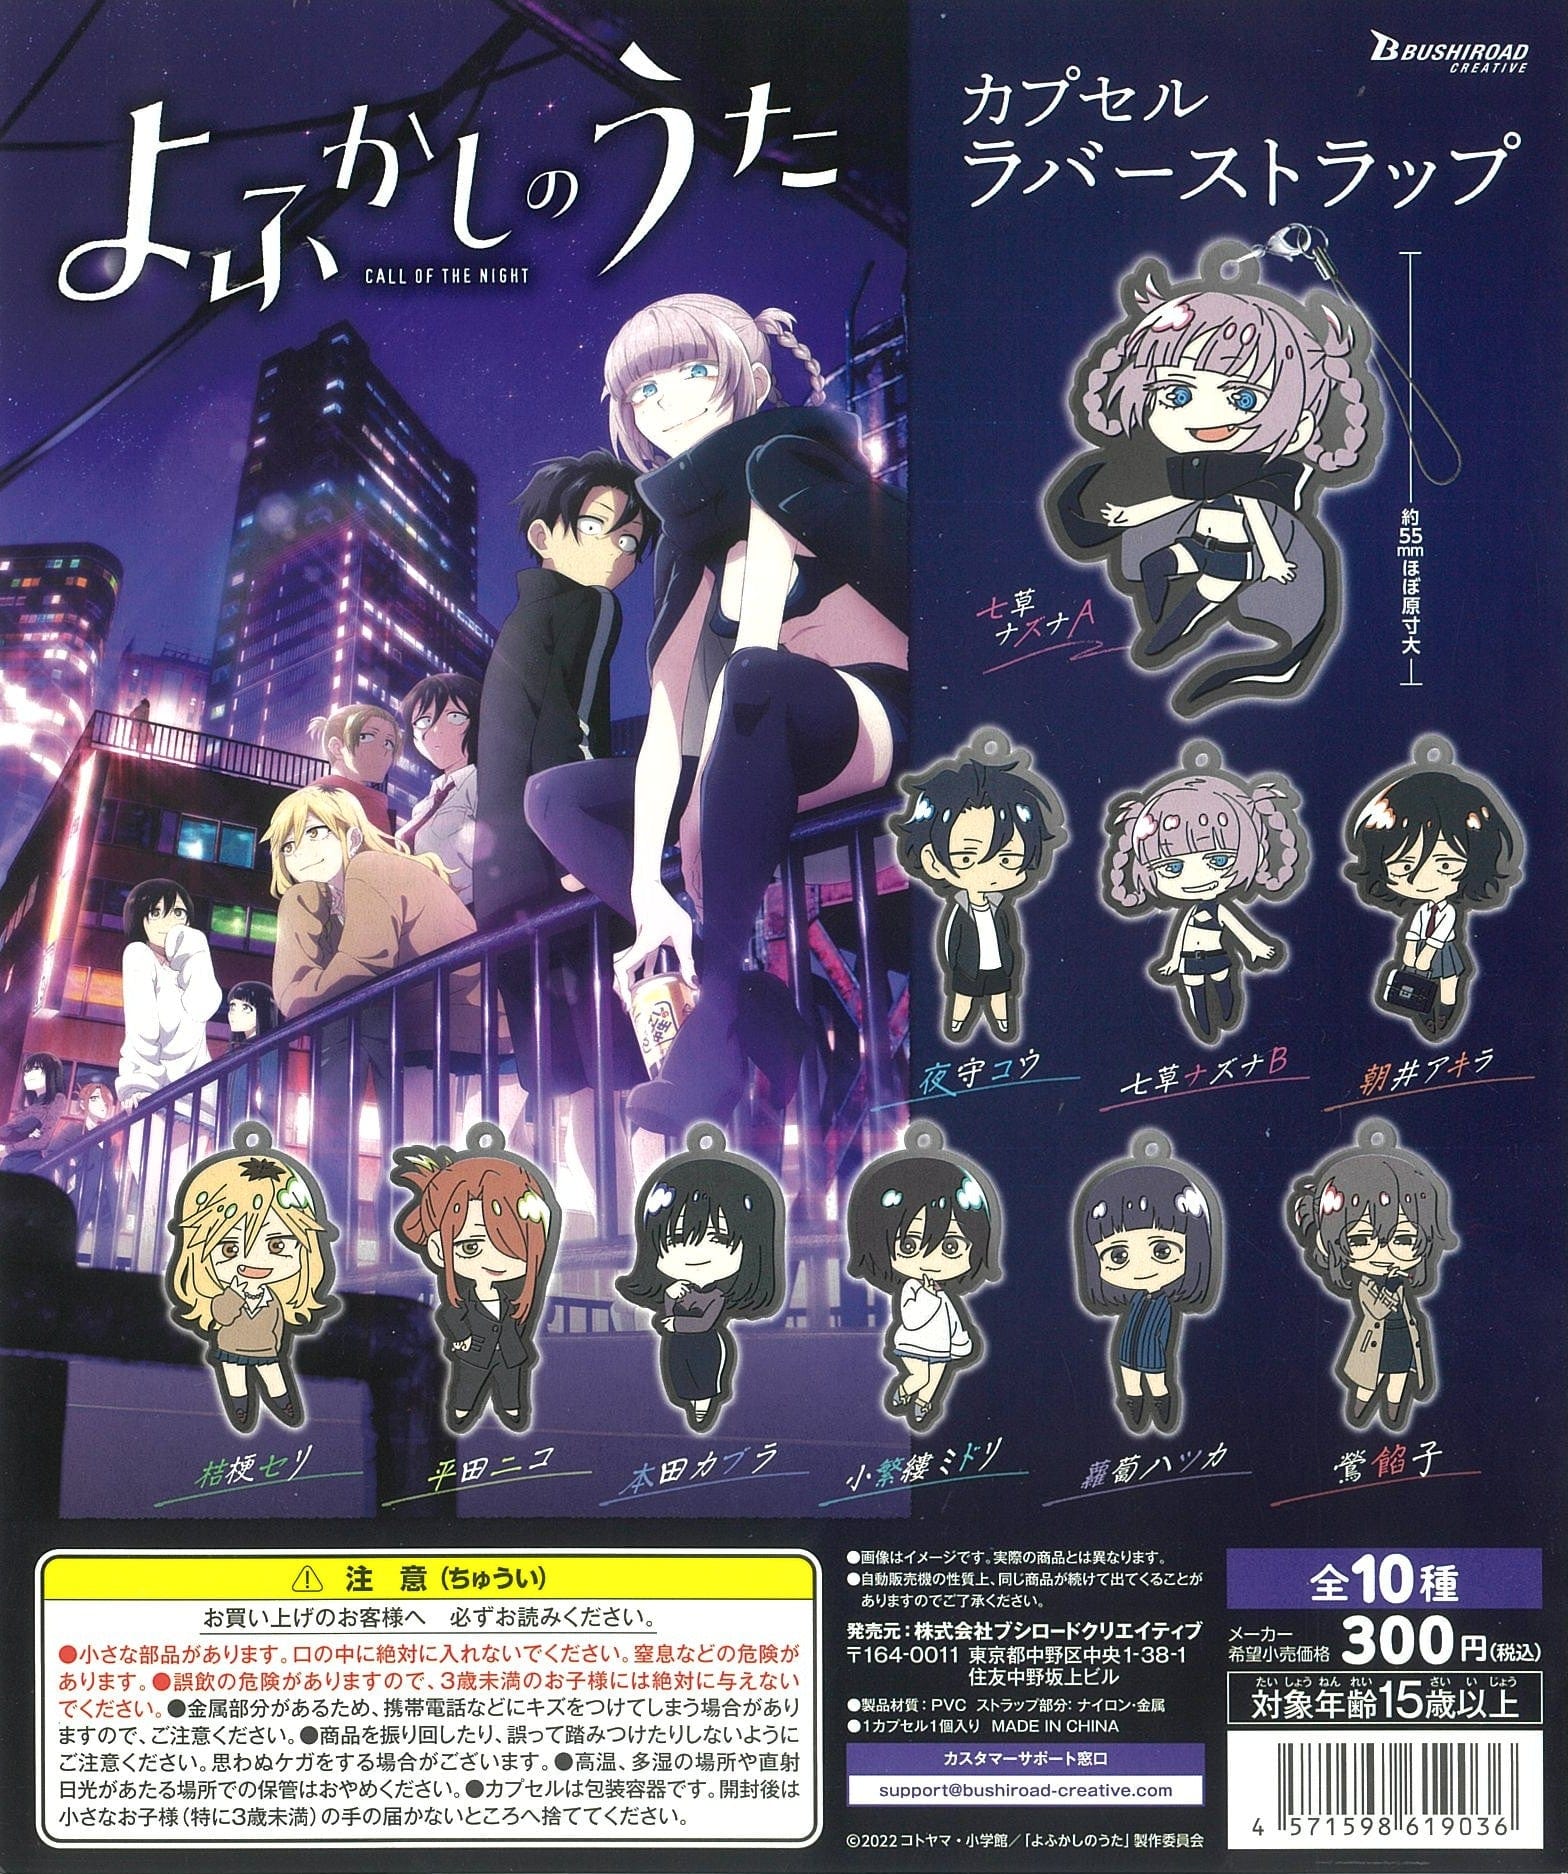 Bushiroad Creative CP1886 Call of The Night Capsule Rubber Strap